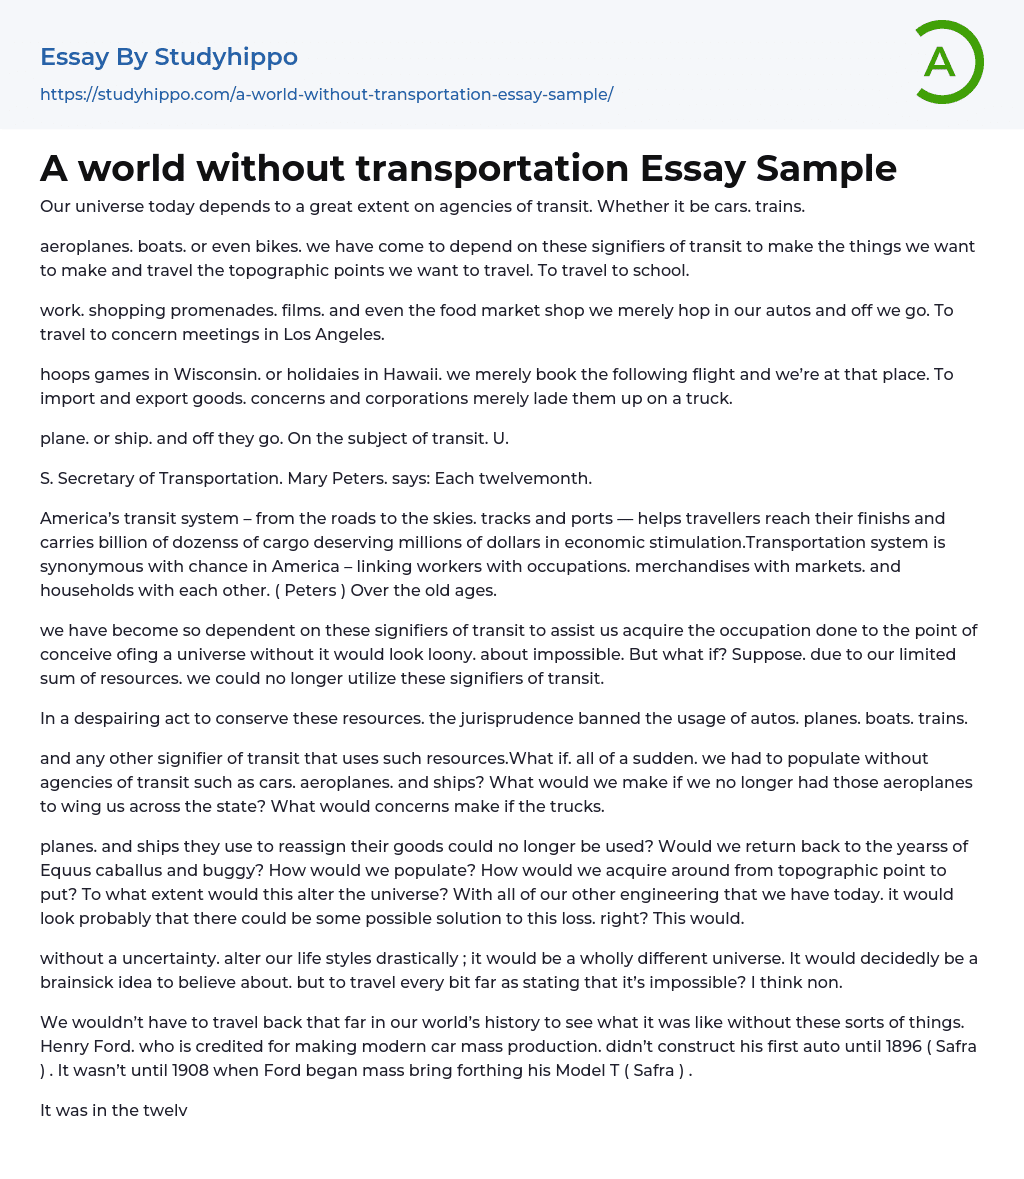 A world without transportation Essay Sample